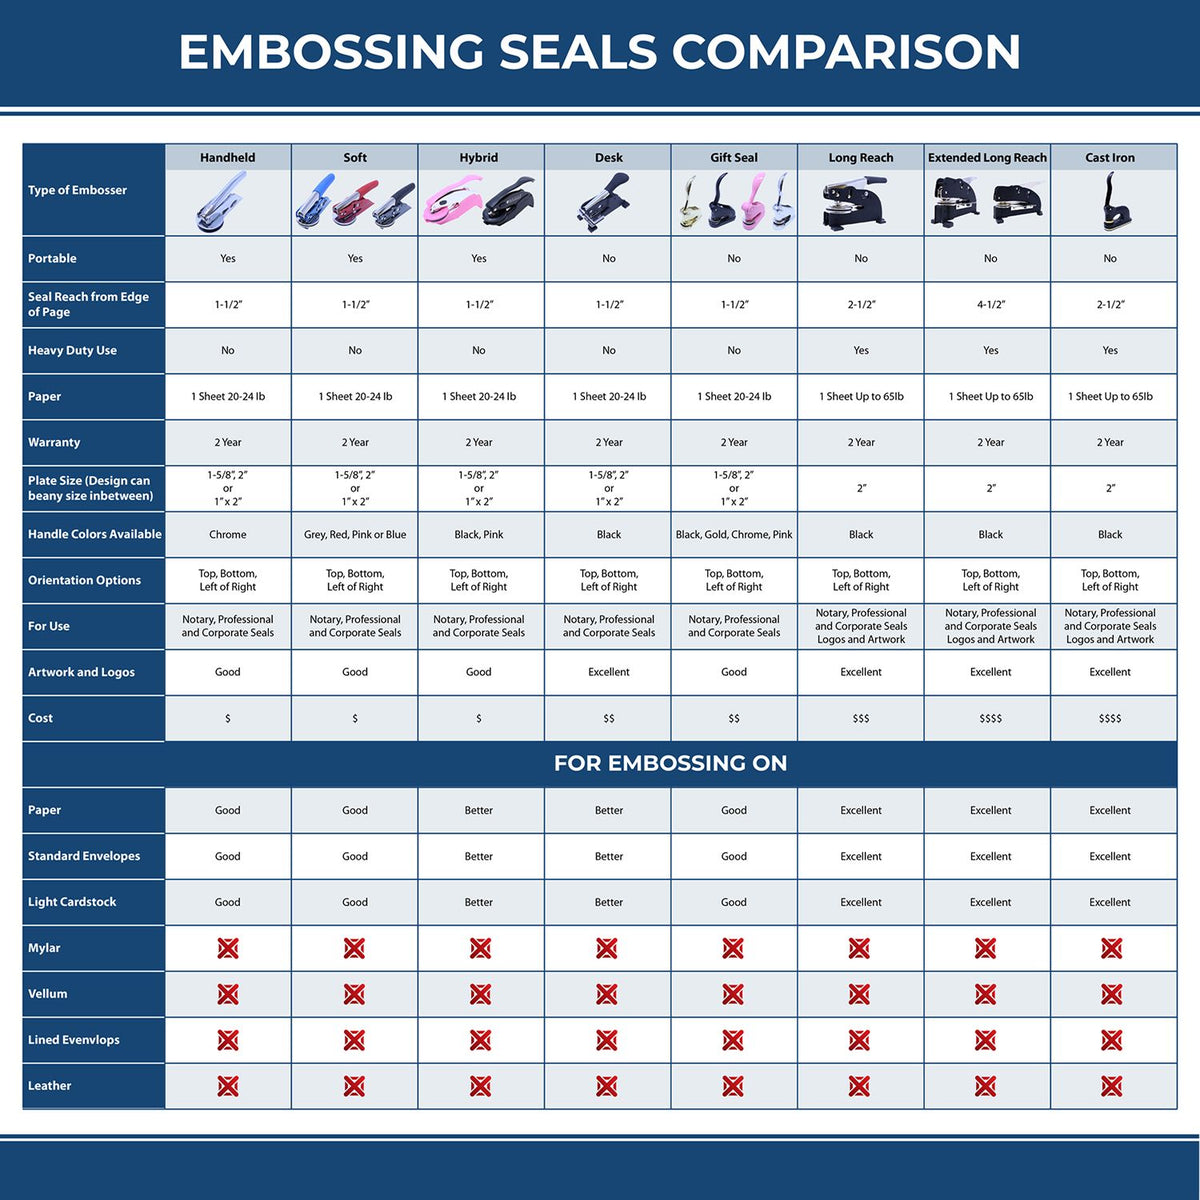 A comparison chart for the different types of mount models available for the Soft Kentucky Professional Engineer Seal.